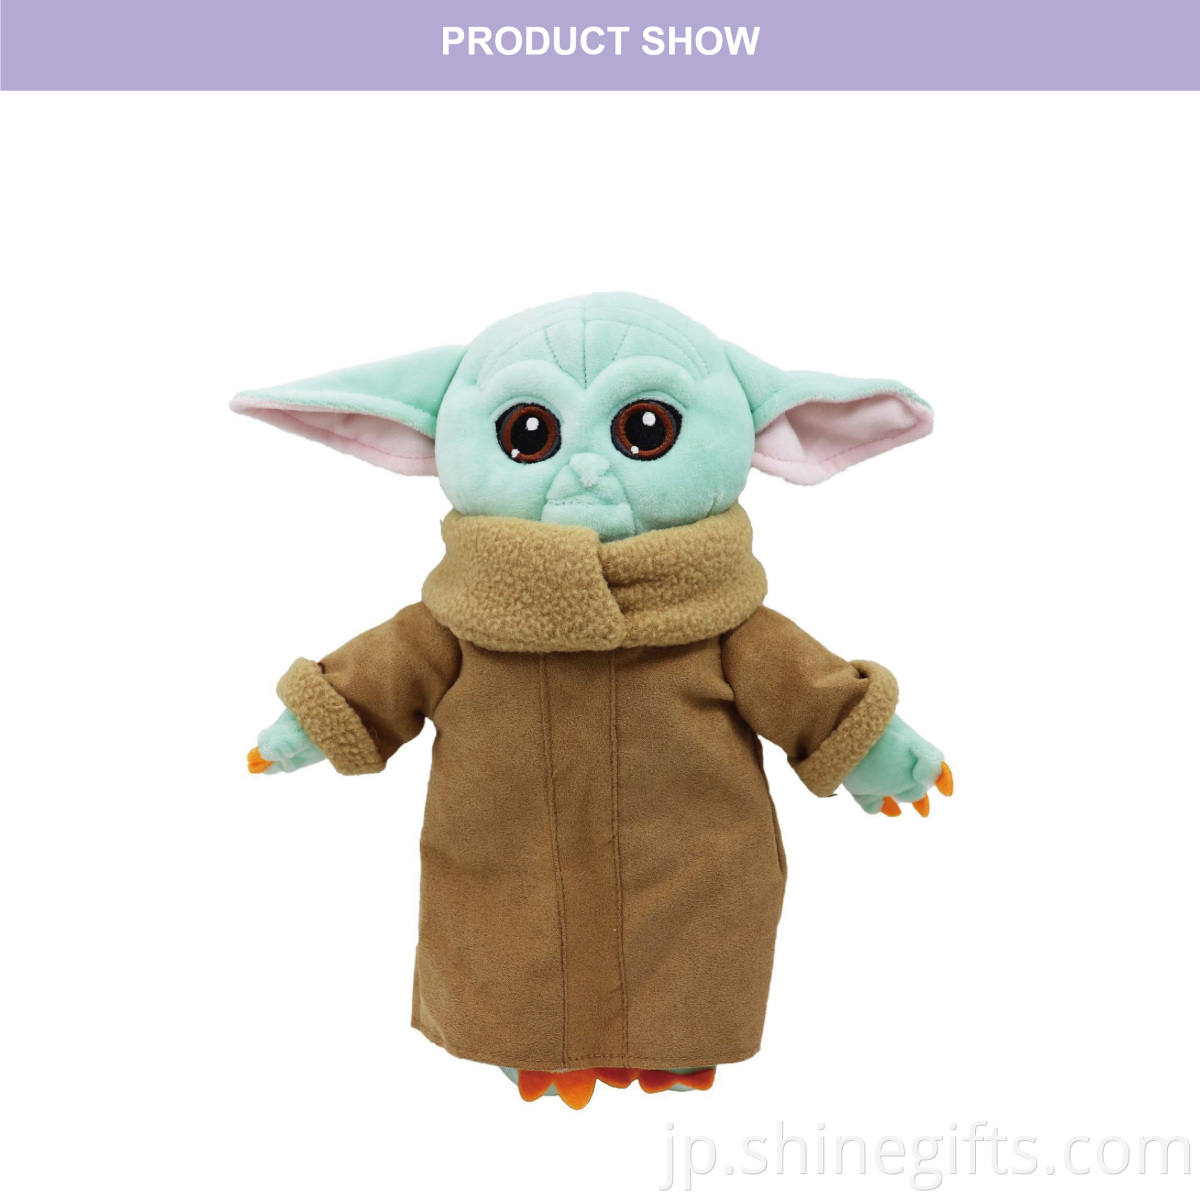 New Design Soft Comfortable Child Doll Gift Pillow Stuffed Animal Toy Baby Yoda Plush Toy